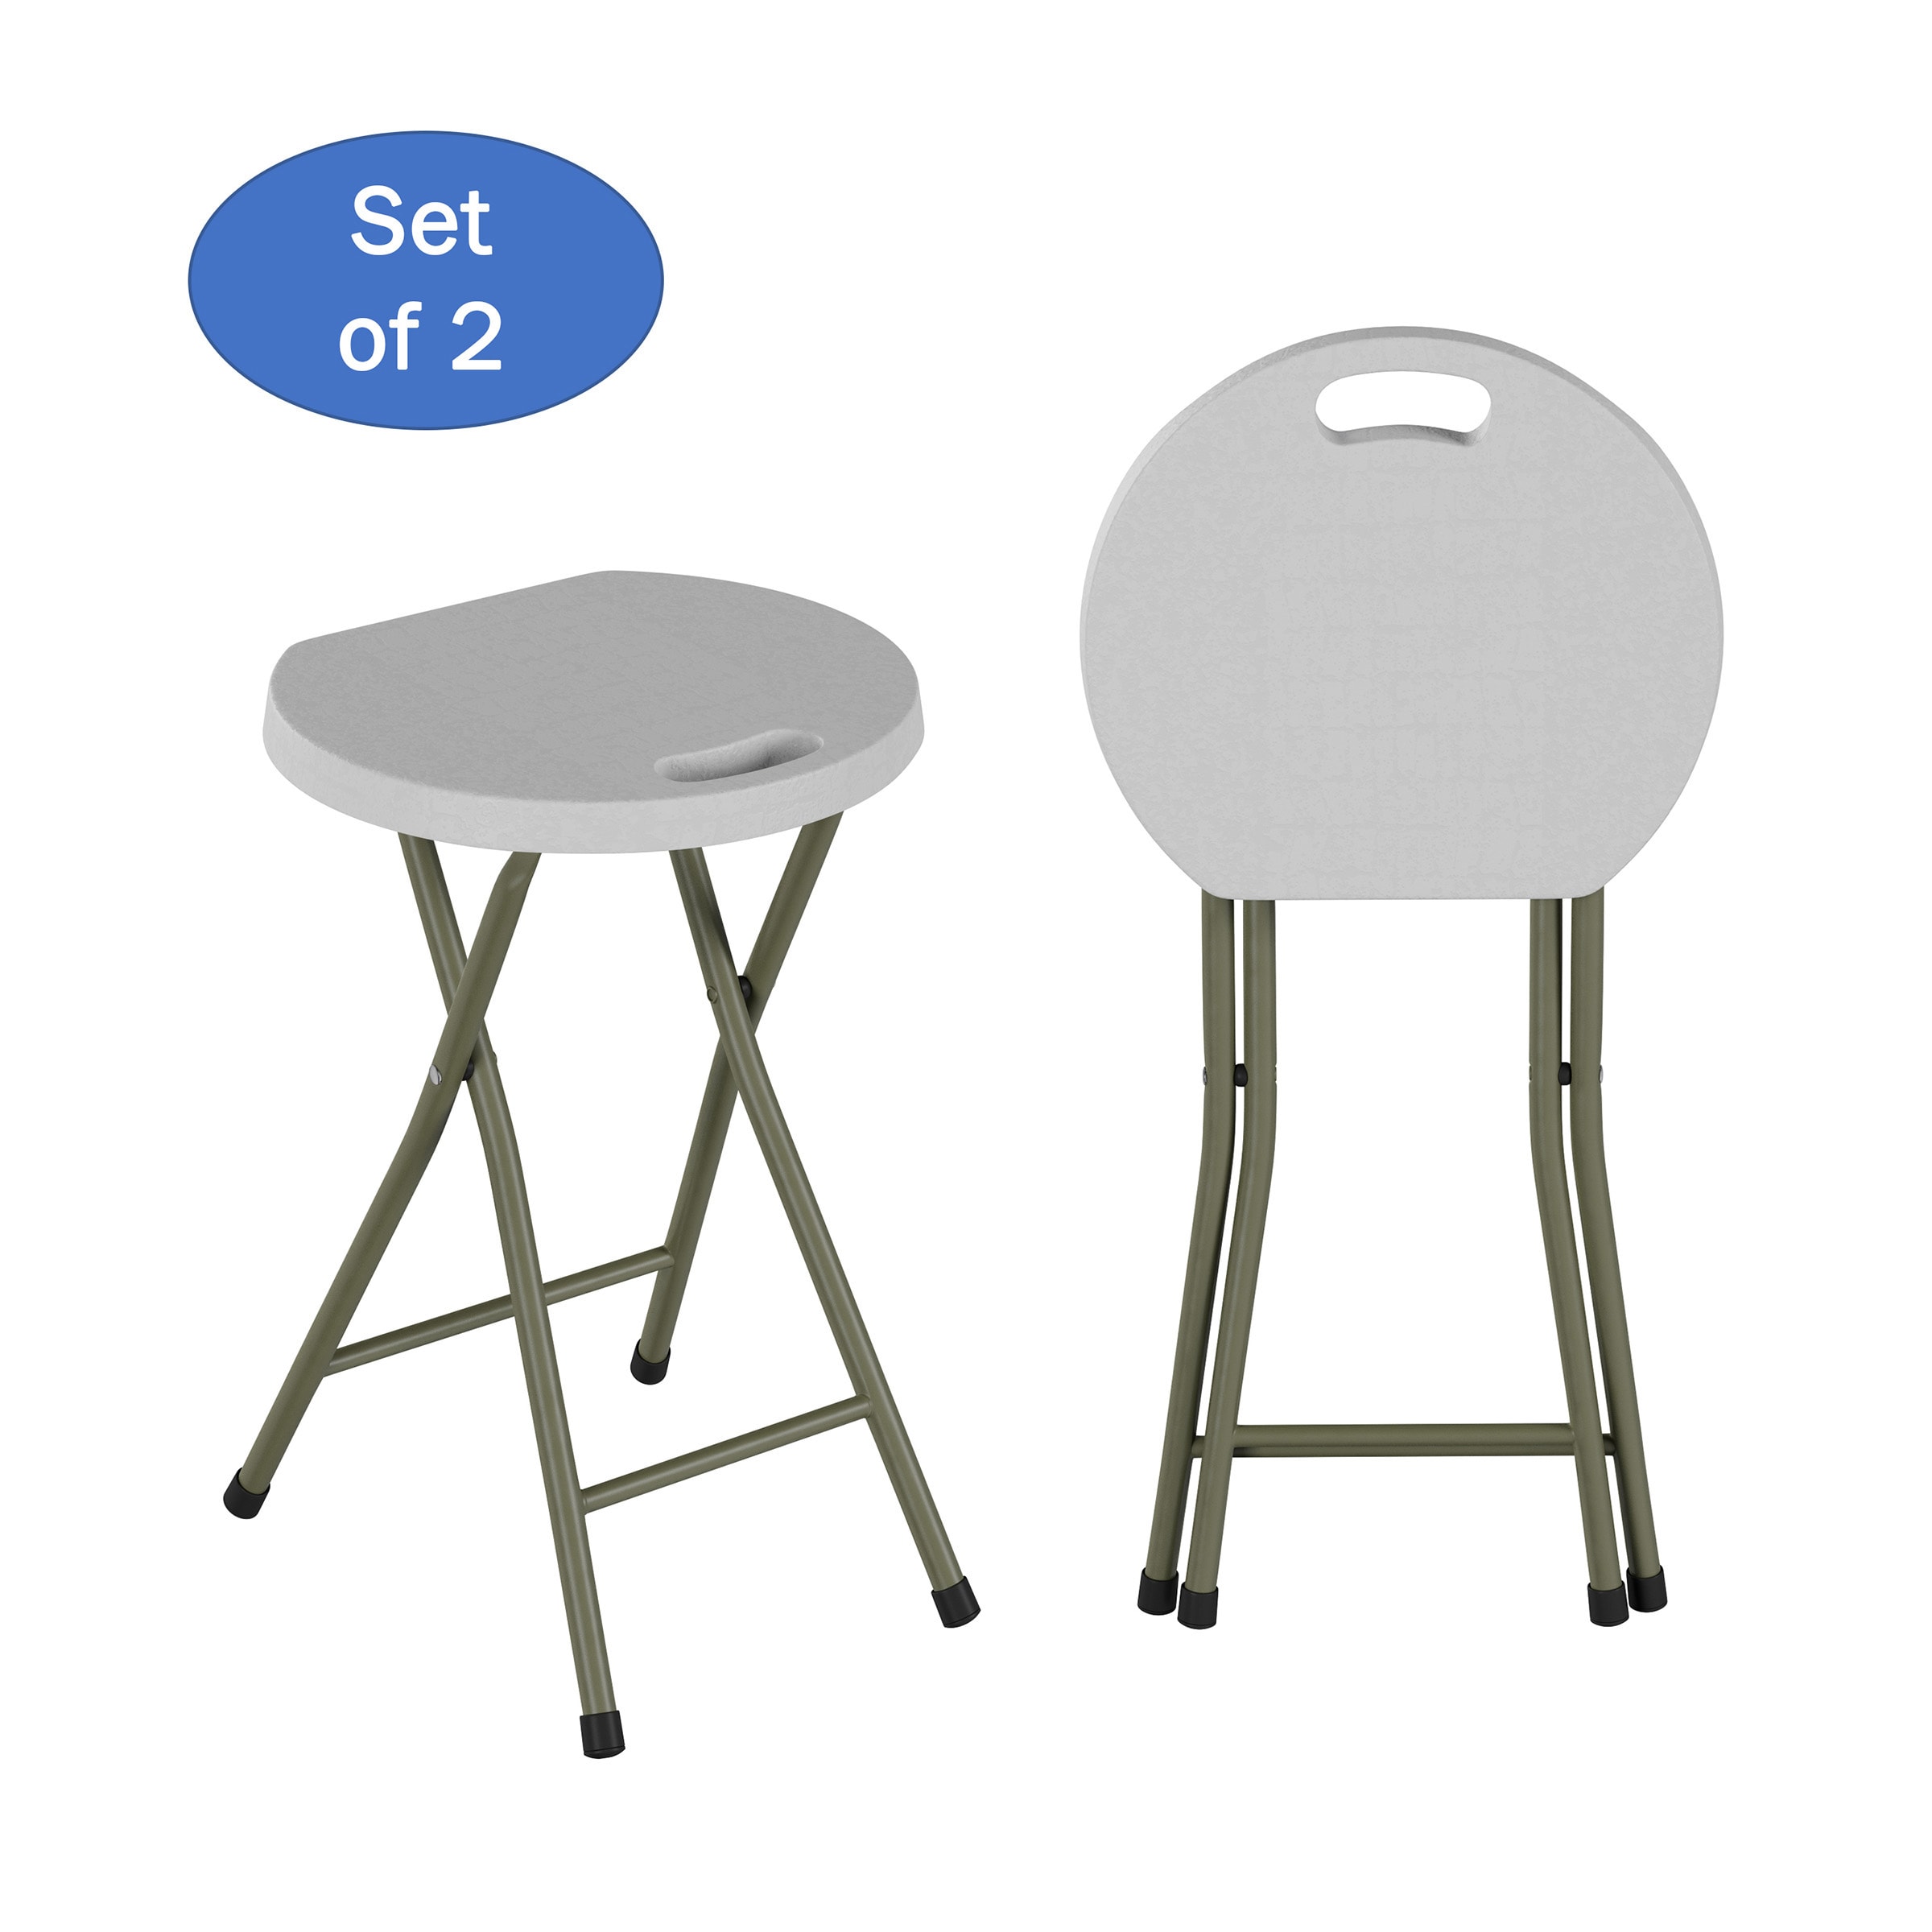 Somerset Home 18 inch Portable Bar Stool - Set of 2, White